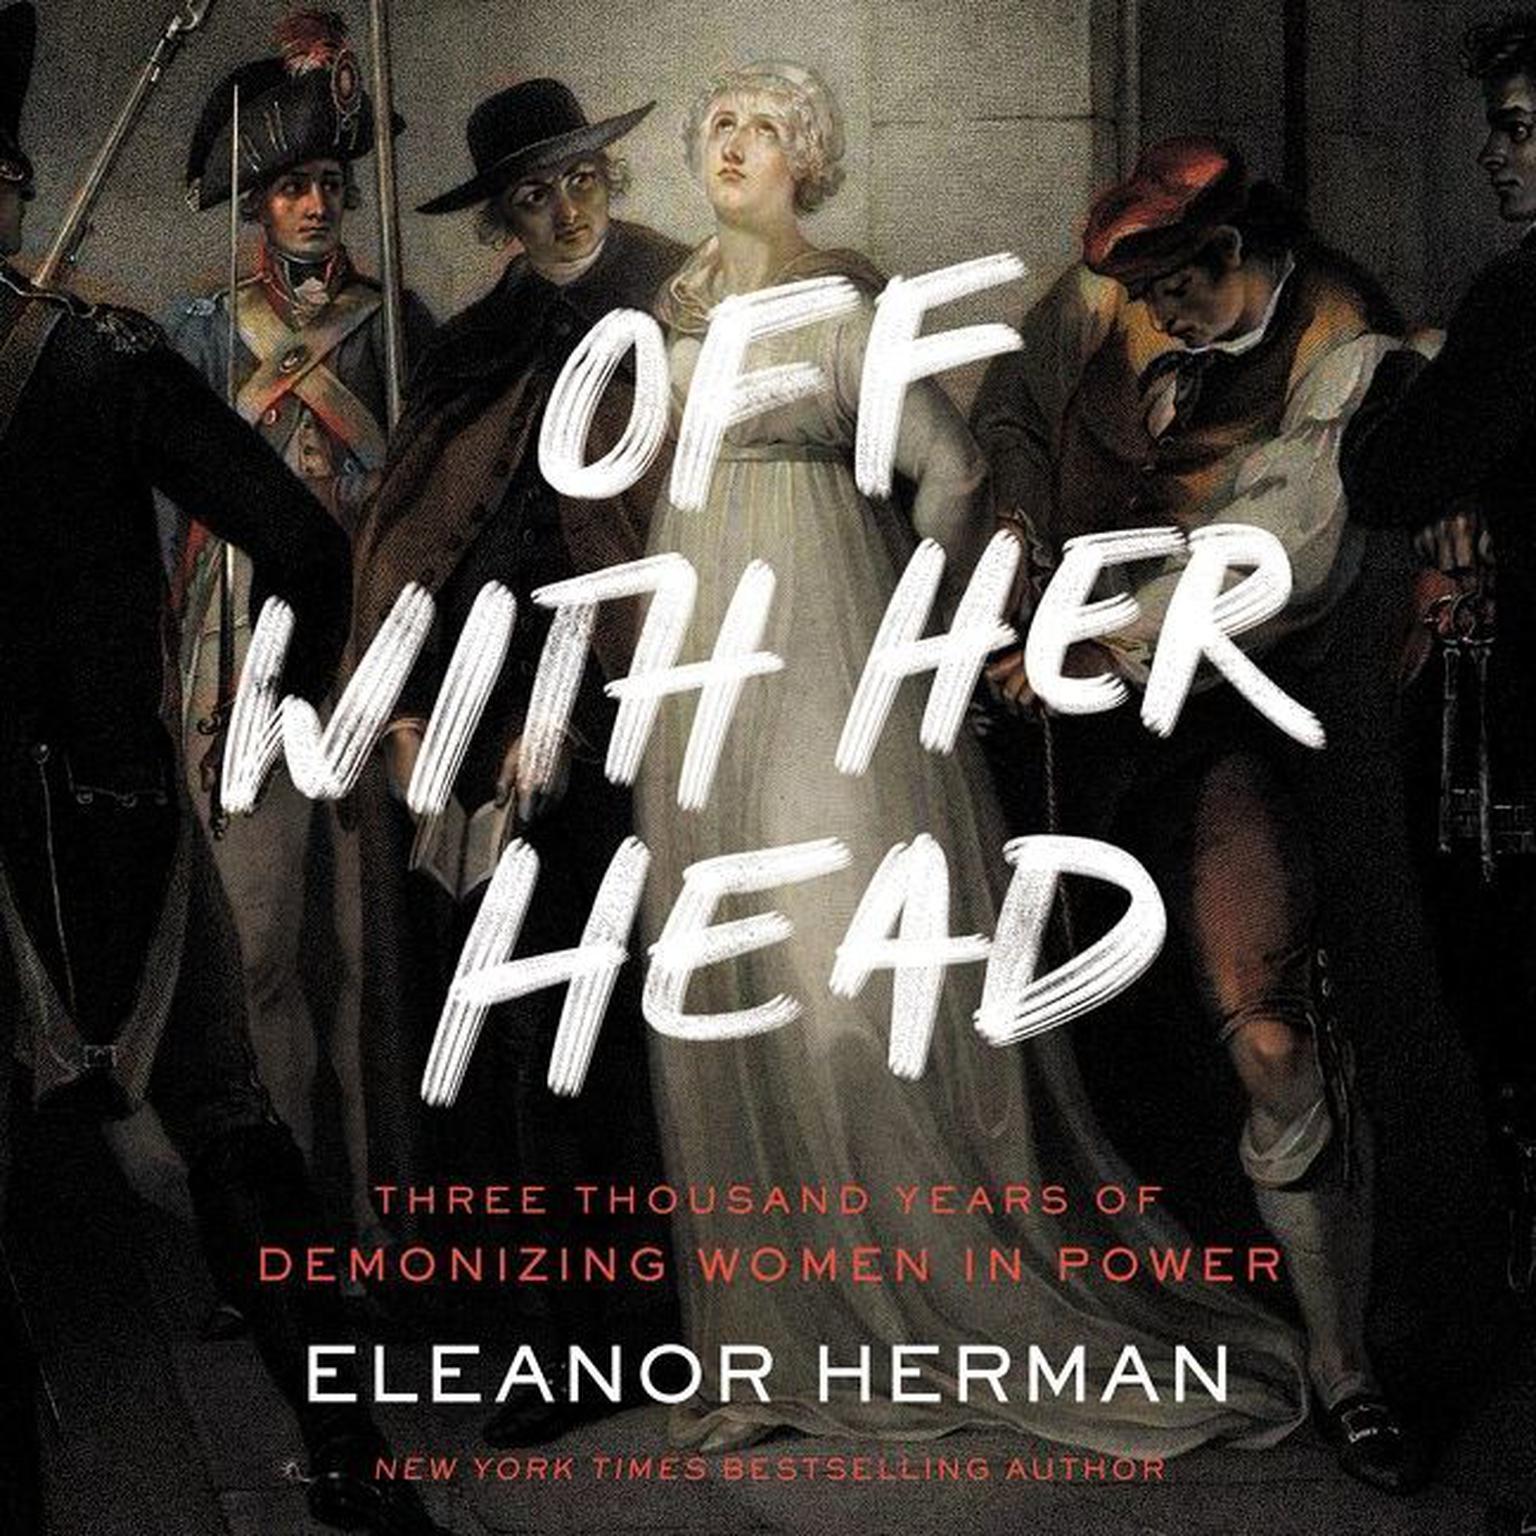 Off with Her Head: Three Thousand Years of Demonizing Women in Power Audiobook, by Eleanor Herman